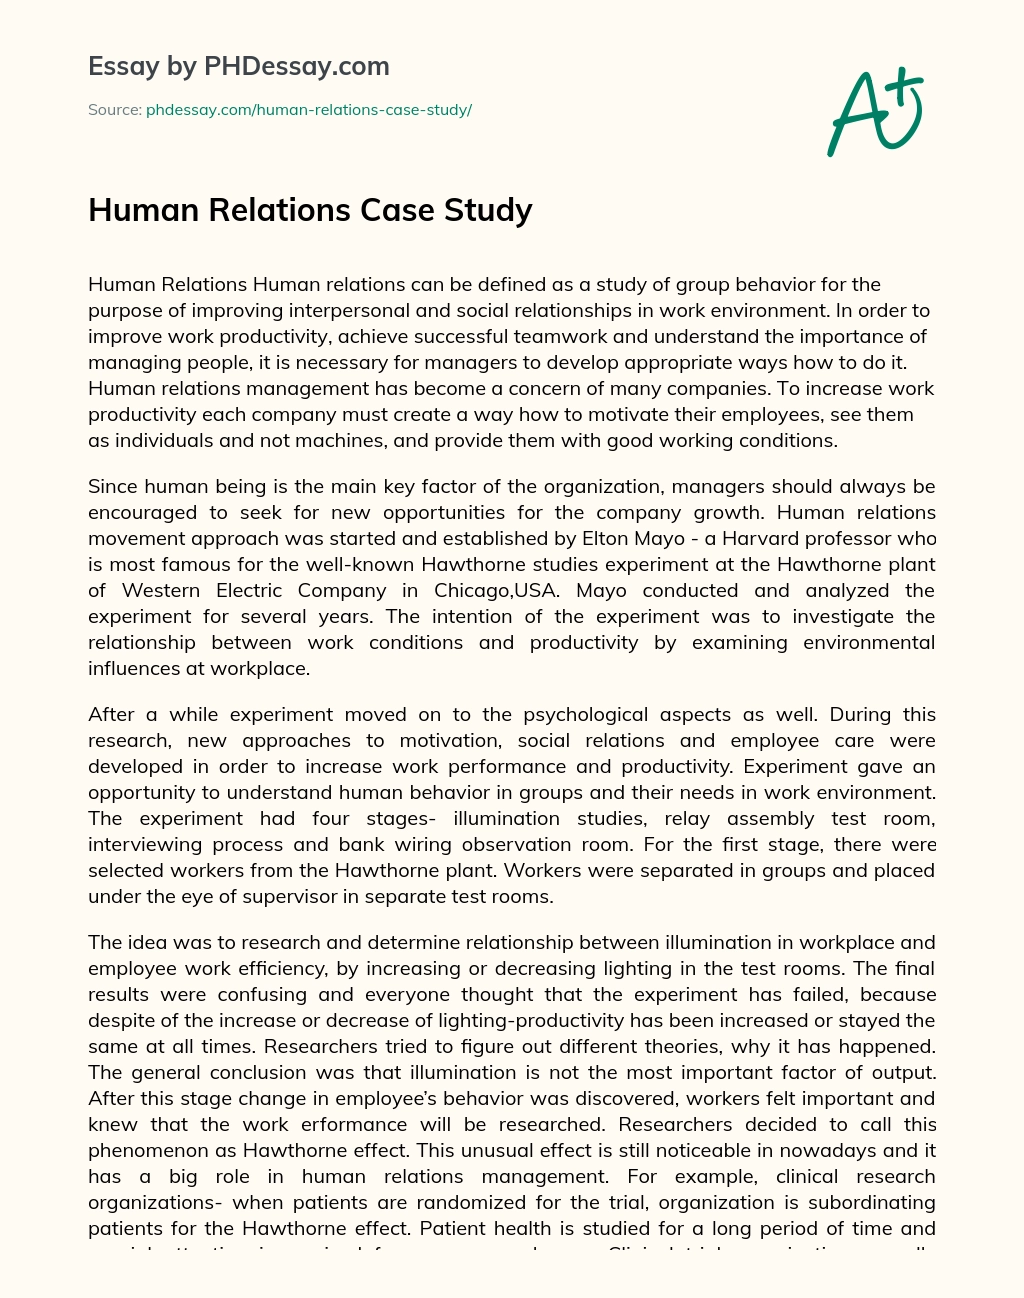 sample case study on human relations